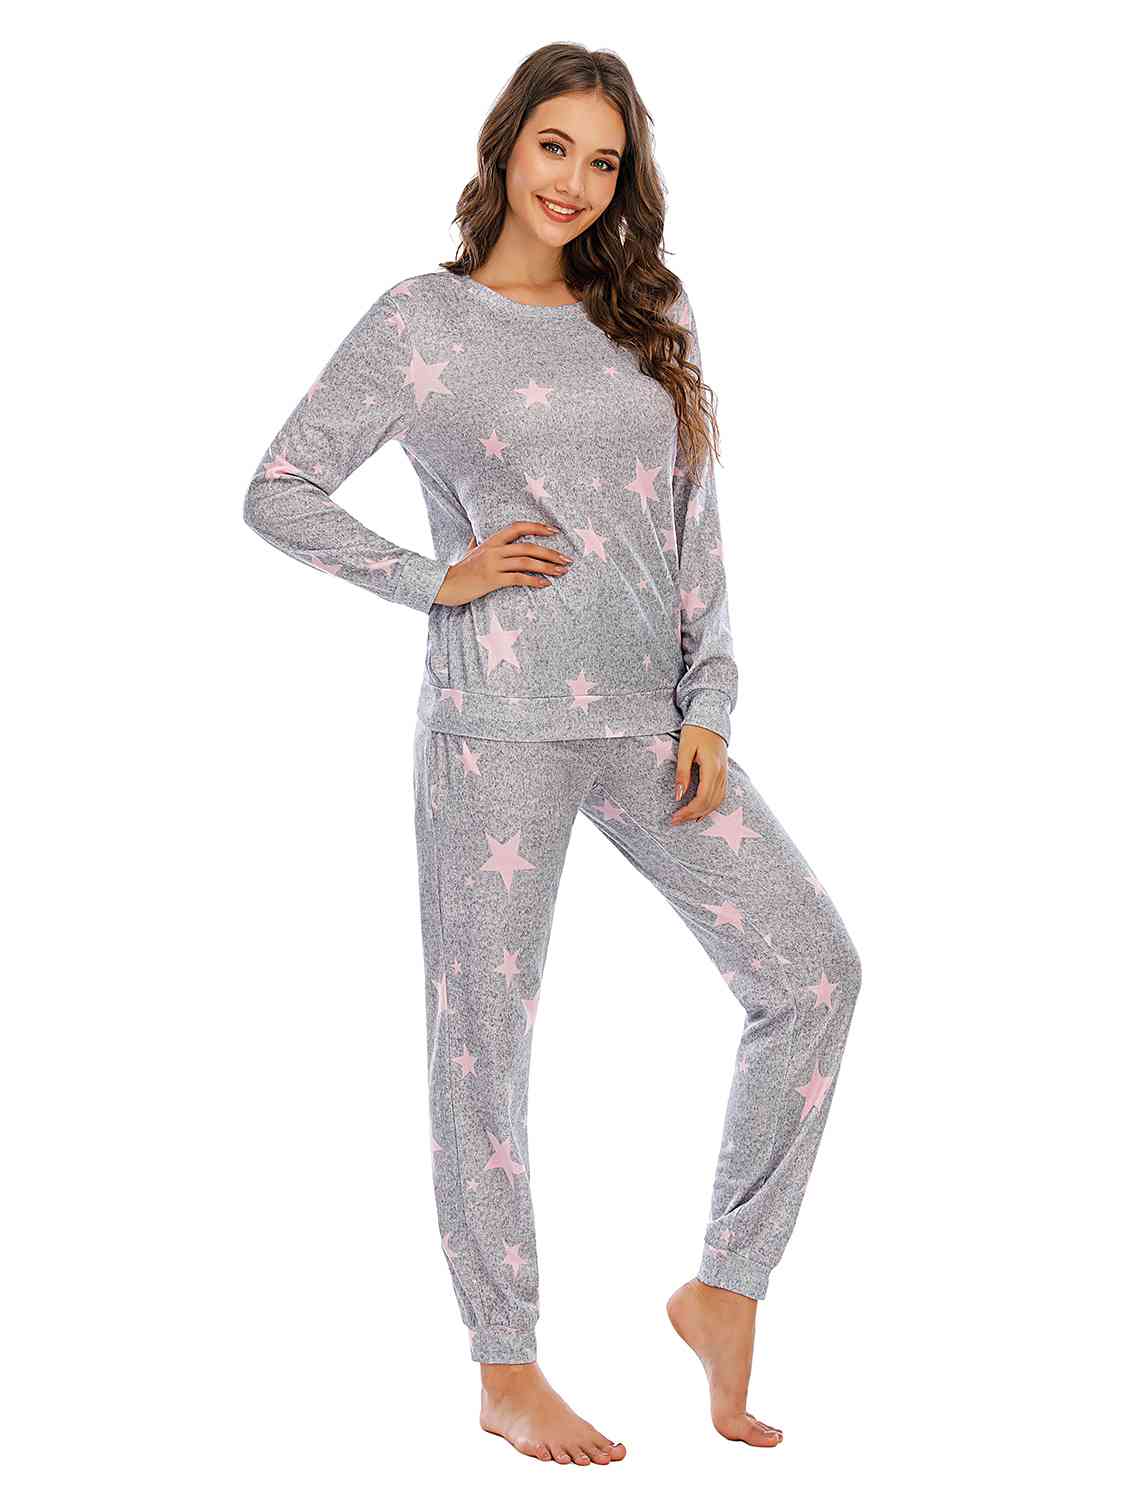 Star Top and Pants Lounge Set BLUE ZONE PLANET